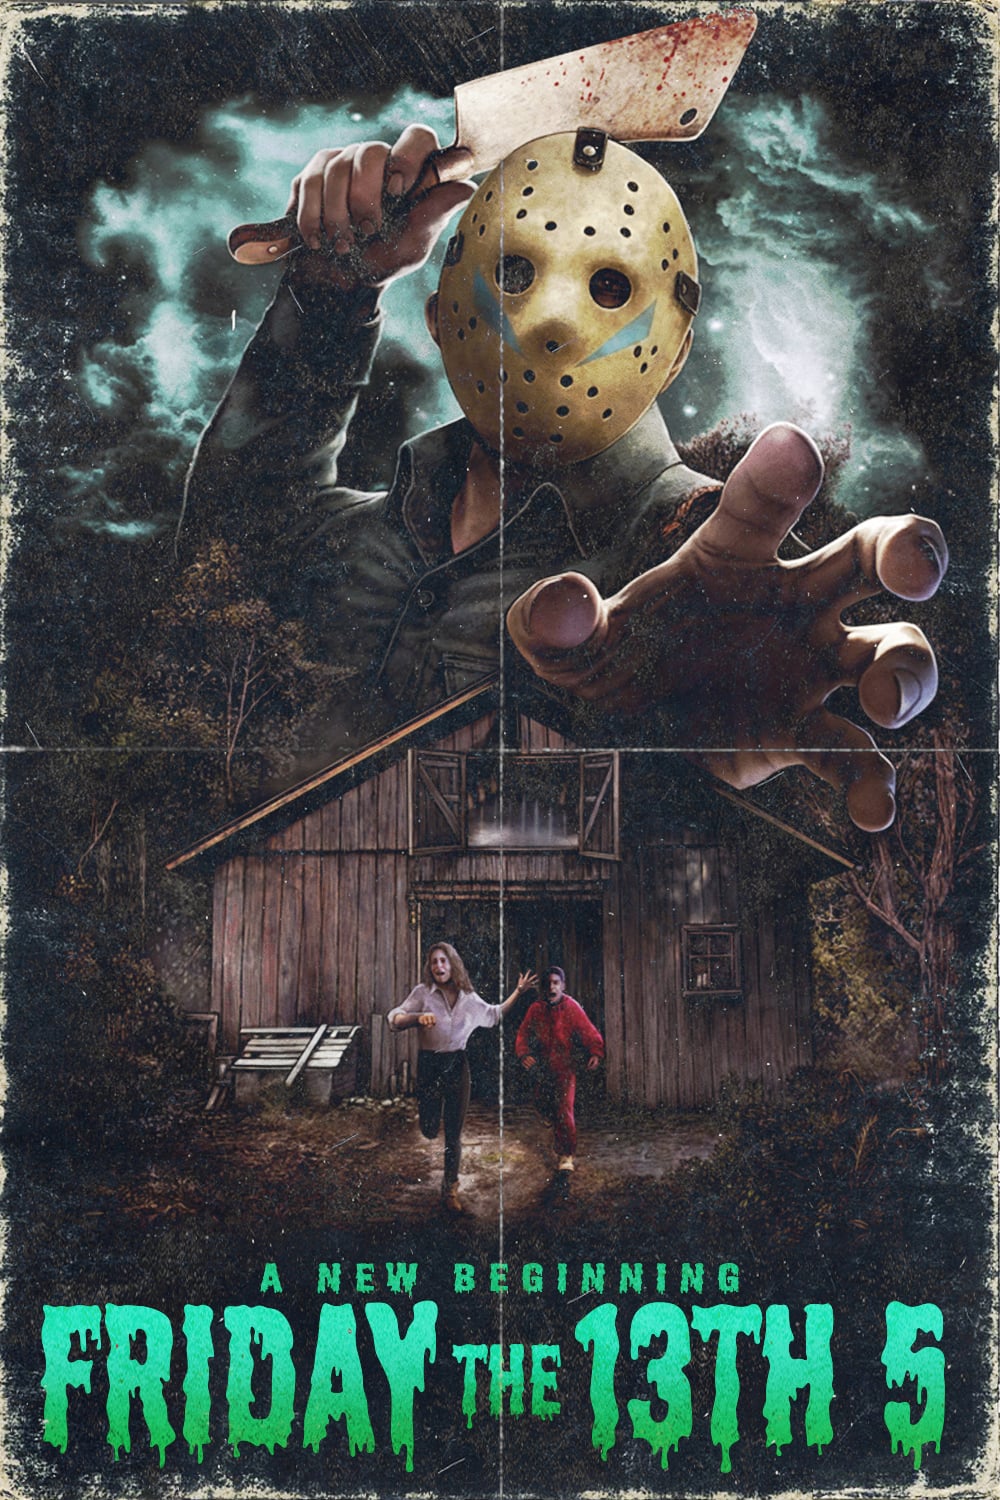 Friday The 13th 5 A New Beginning (1985) Movie Poster Framed or Unframed Glossy Poster Free UK Shipping!!!